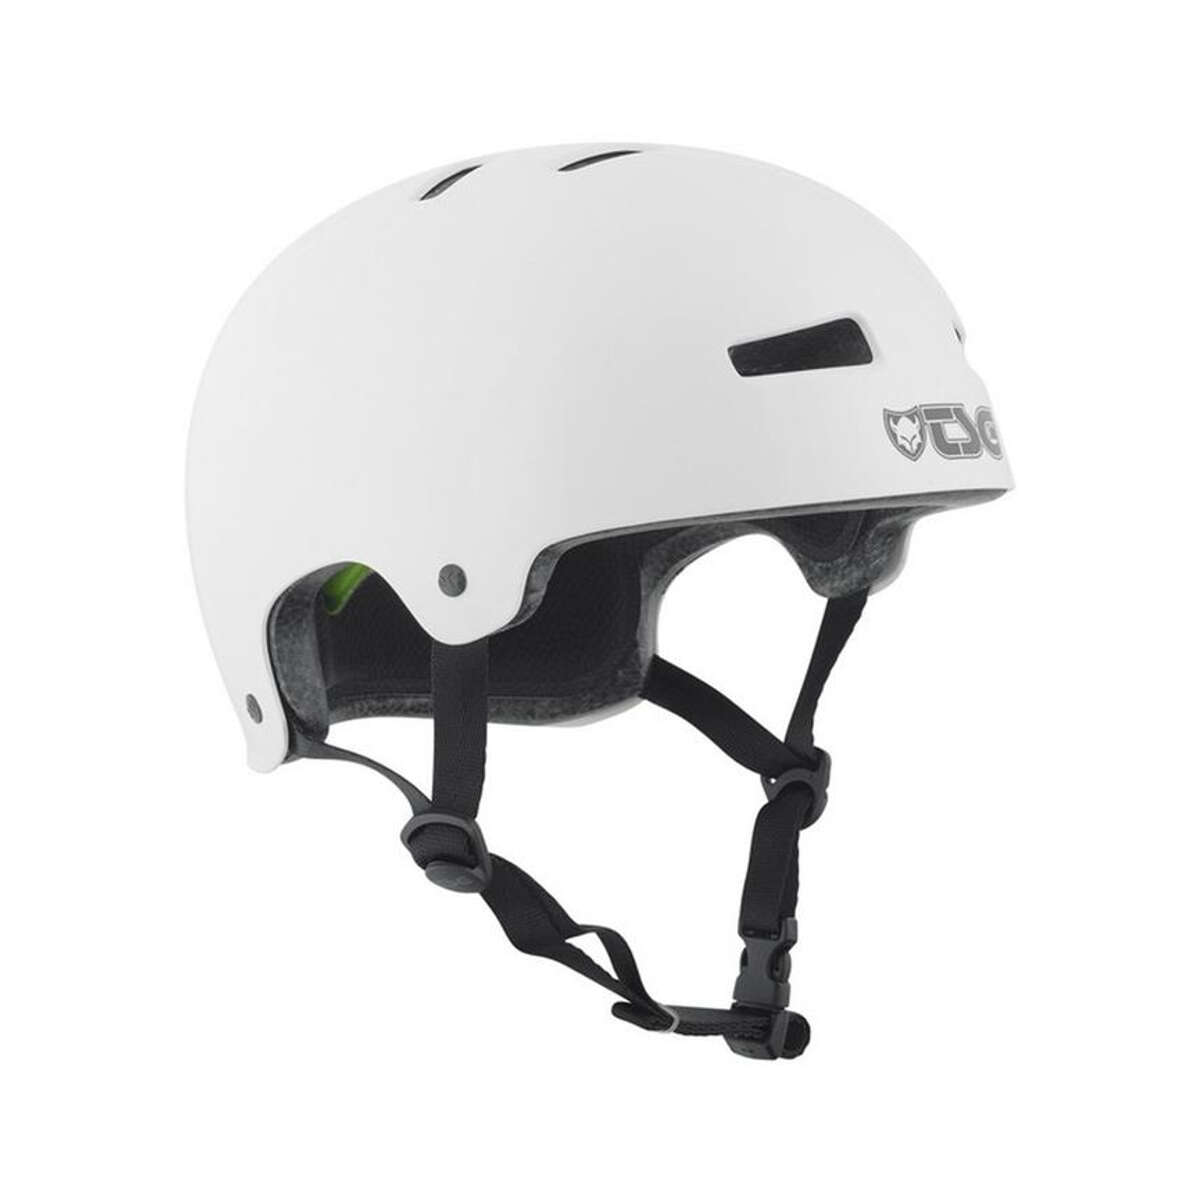 TSG Casco BMX/Dirt Evolution Injected Color - Injected White